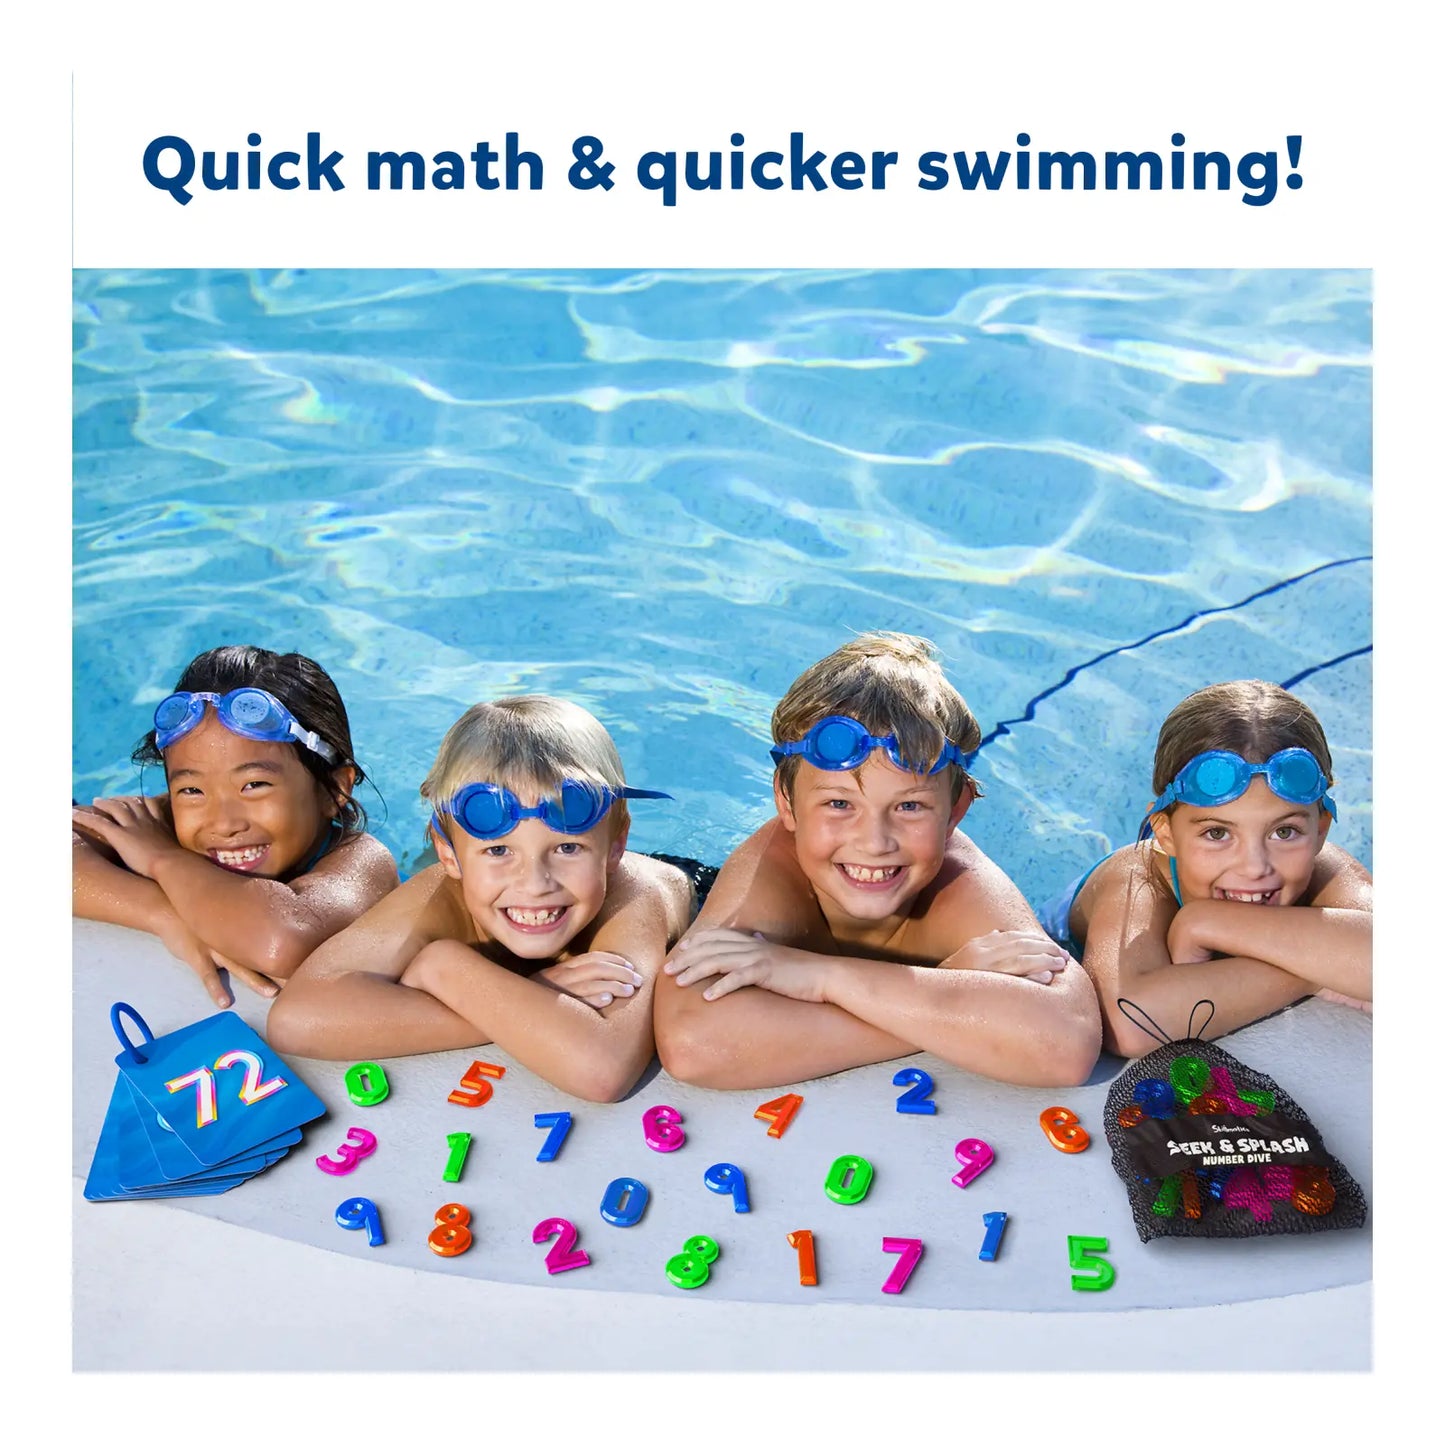 Seek & Splash | Underwater Search and Find Math Game (ages 6+)